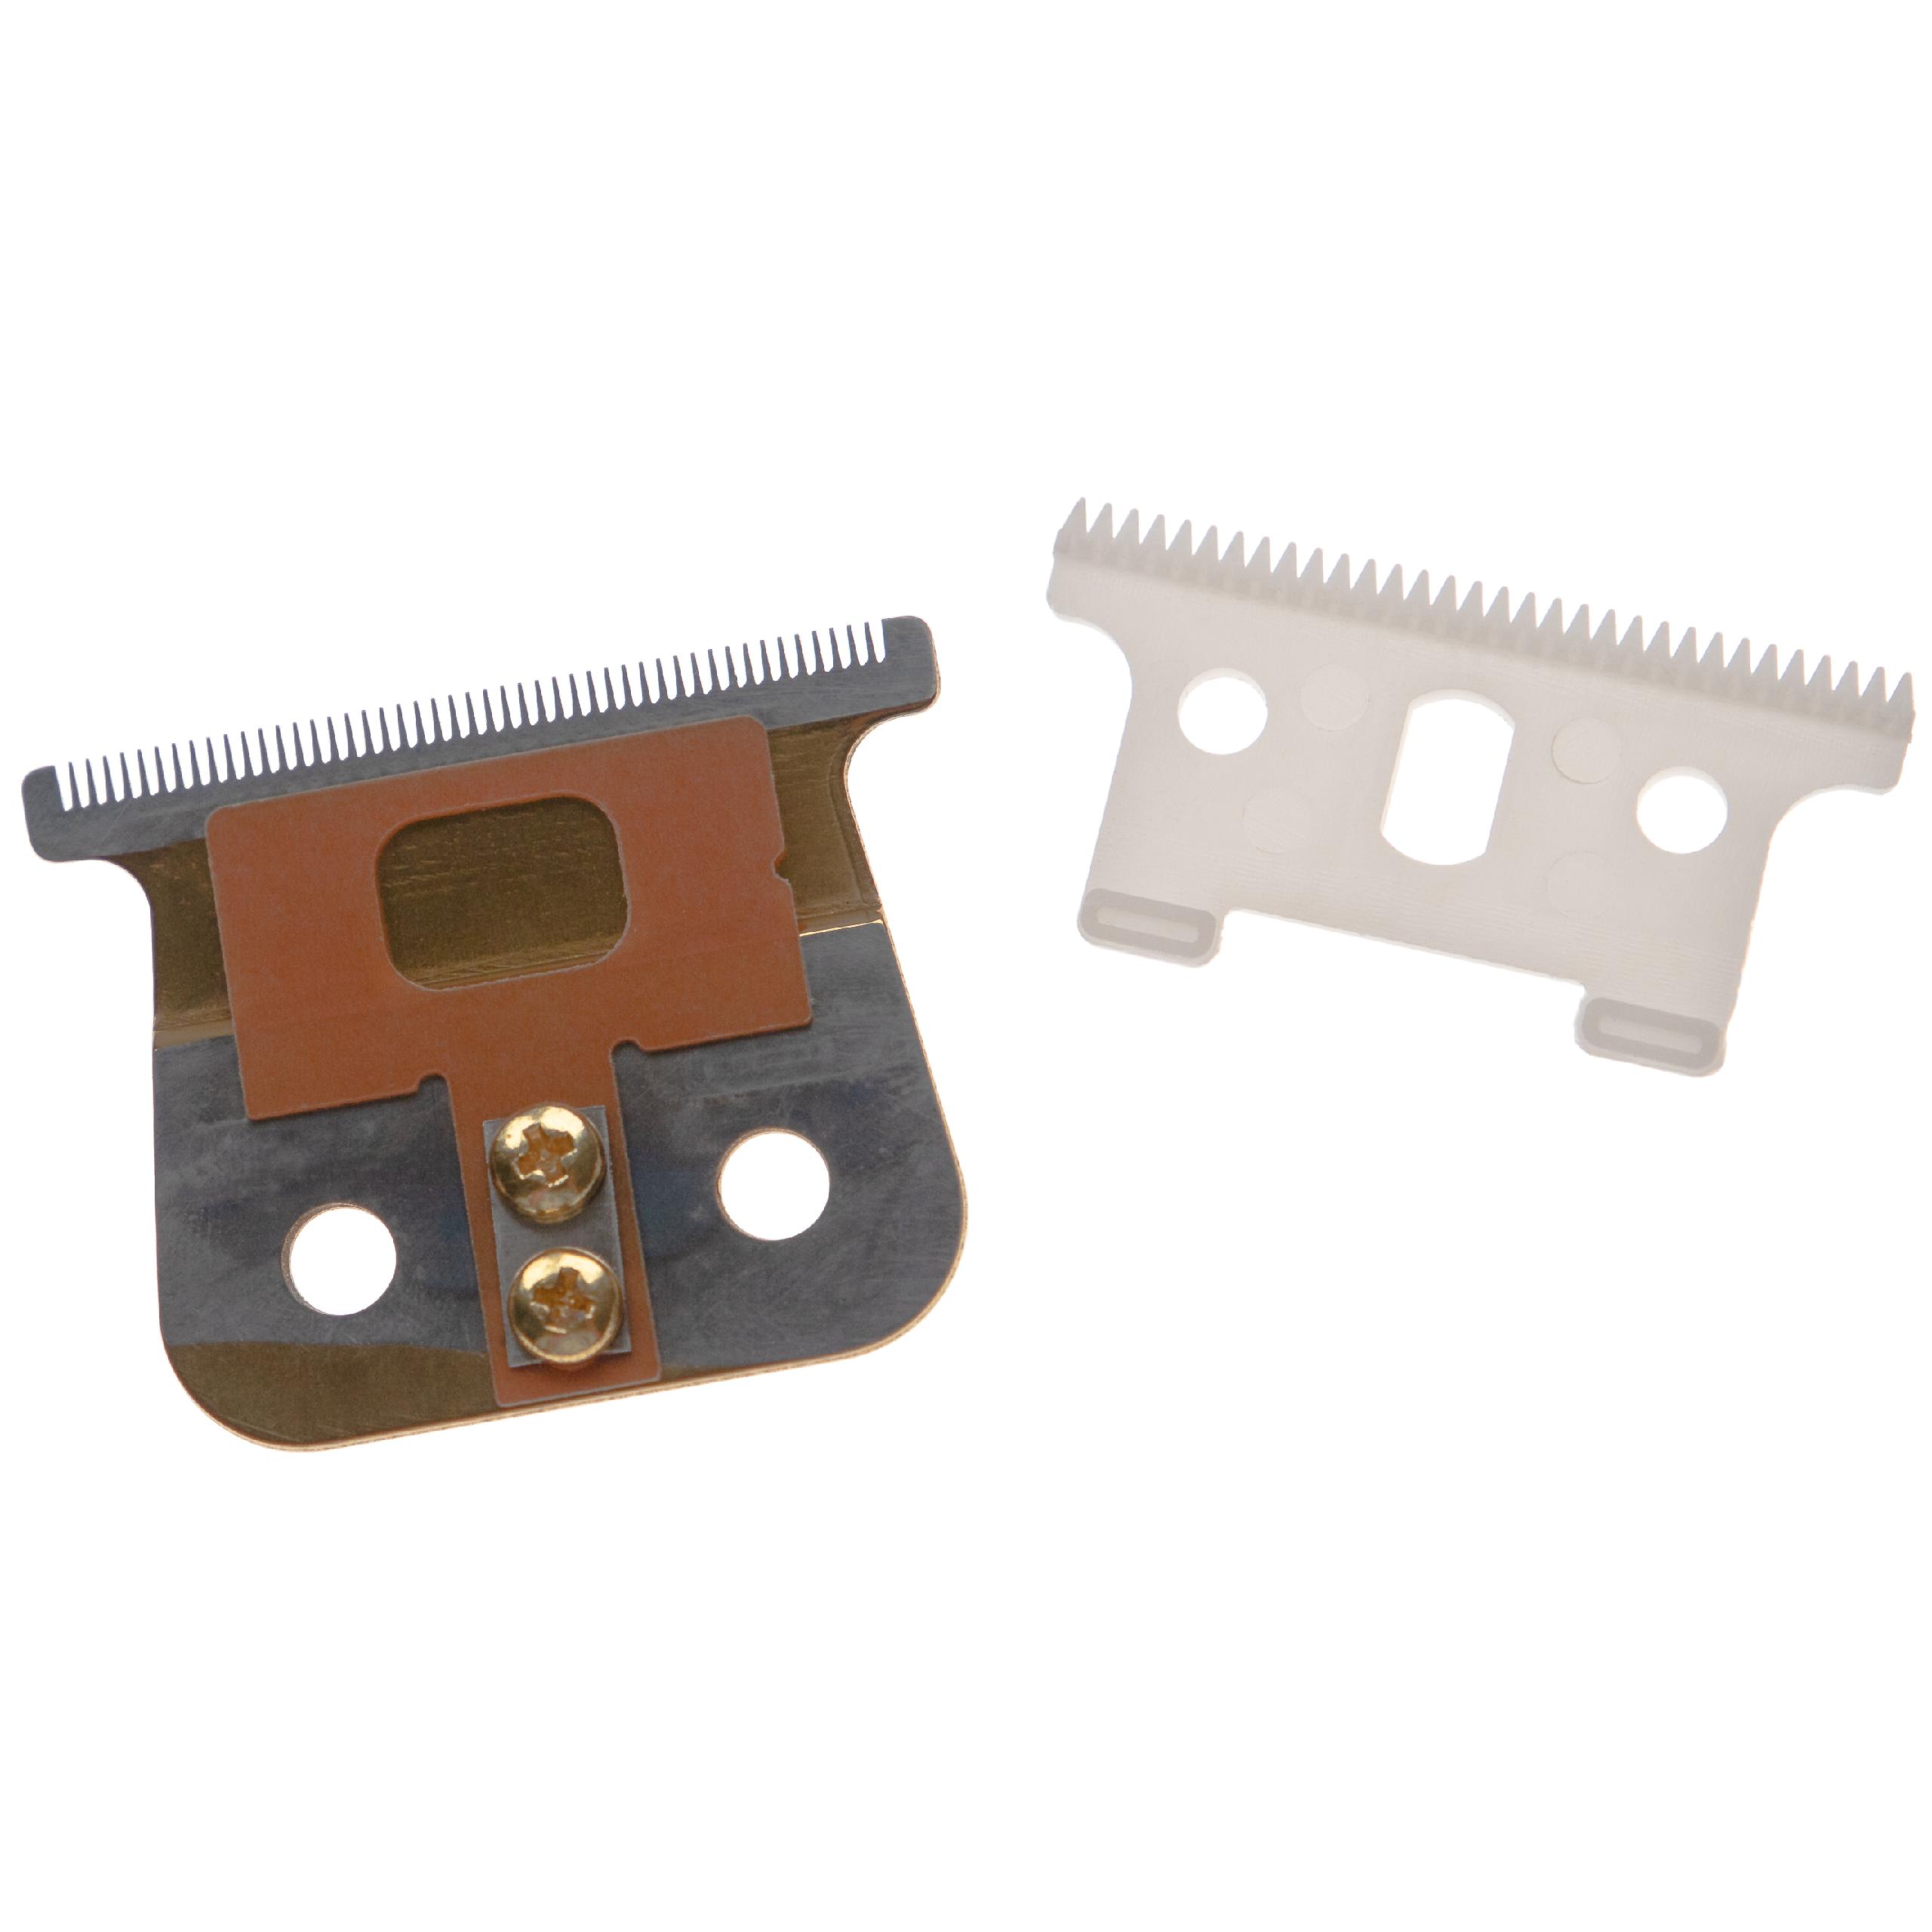 vhbw Cutting Set 2x Blade Replacement for Andis 04521 for Hair Clippers